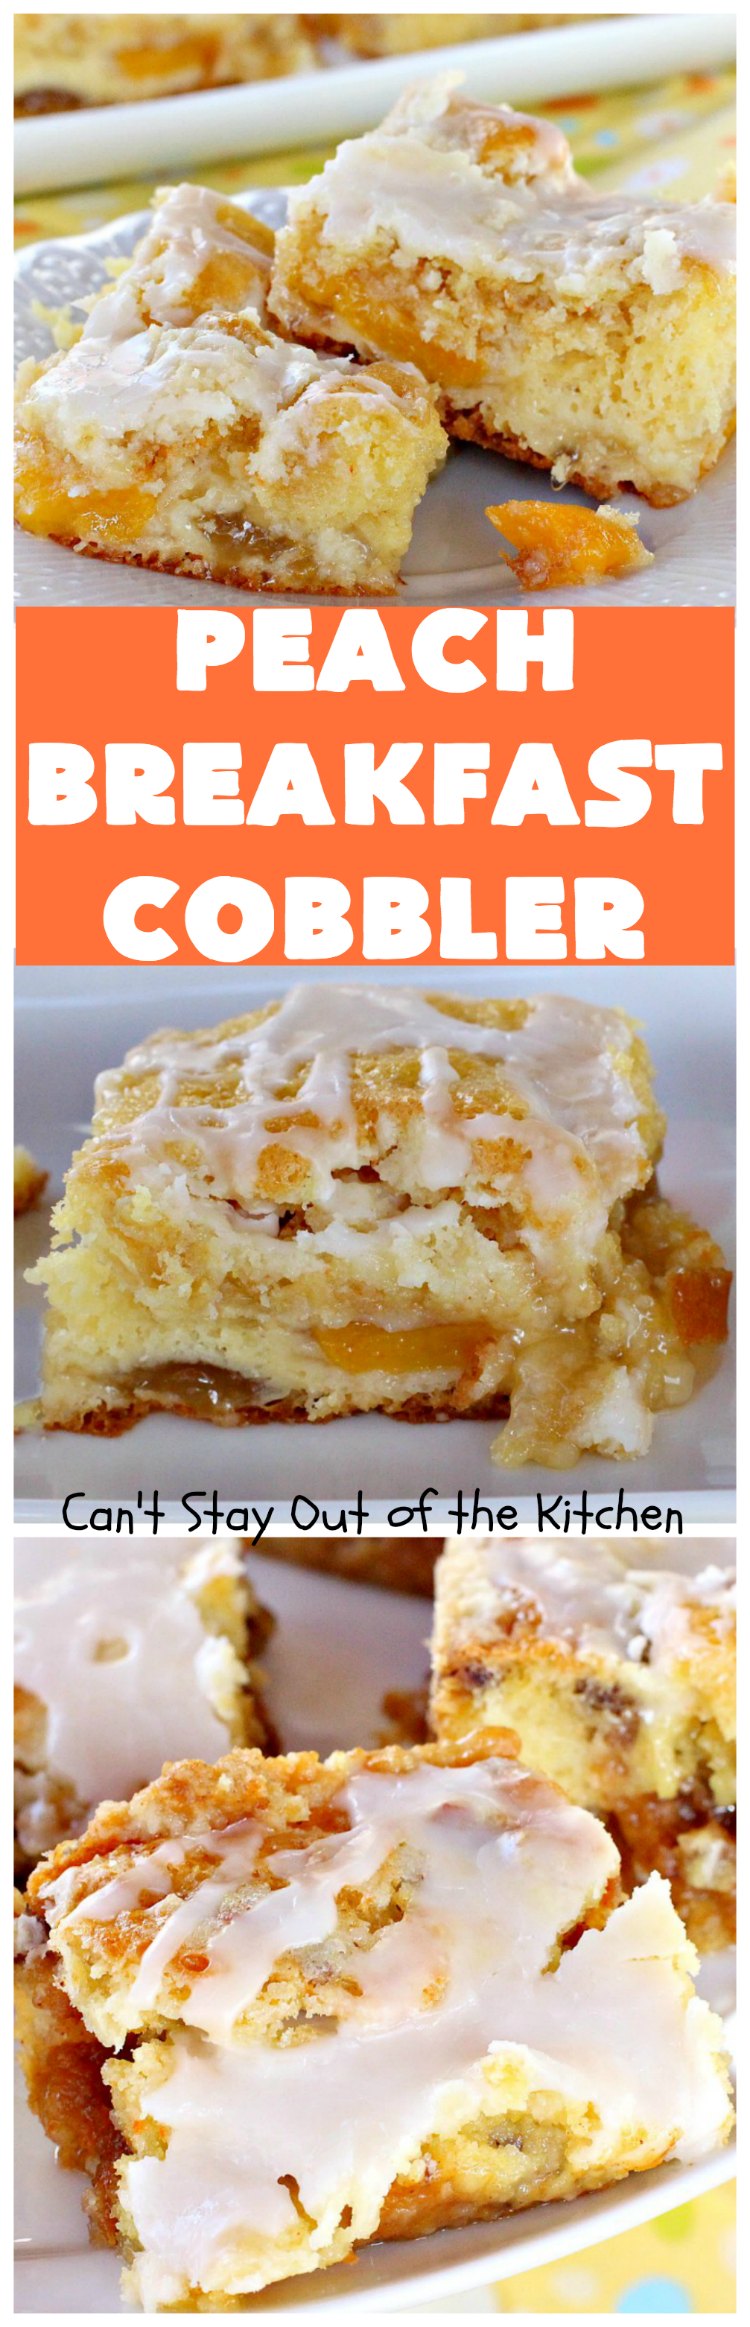 Peach Breakfast Cobbler | Can't Stay Out of the KitchenPeach Breakfast Cobbler | Can't Stay Out of the Kitchen